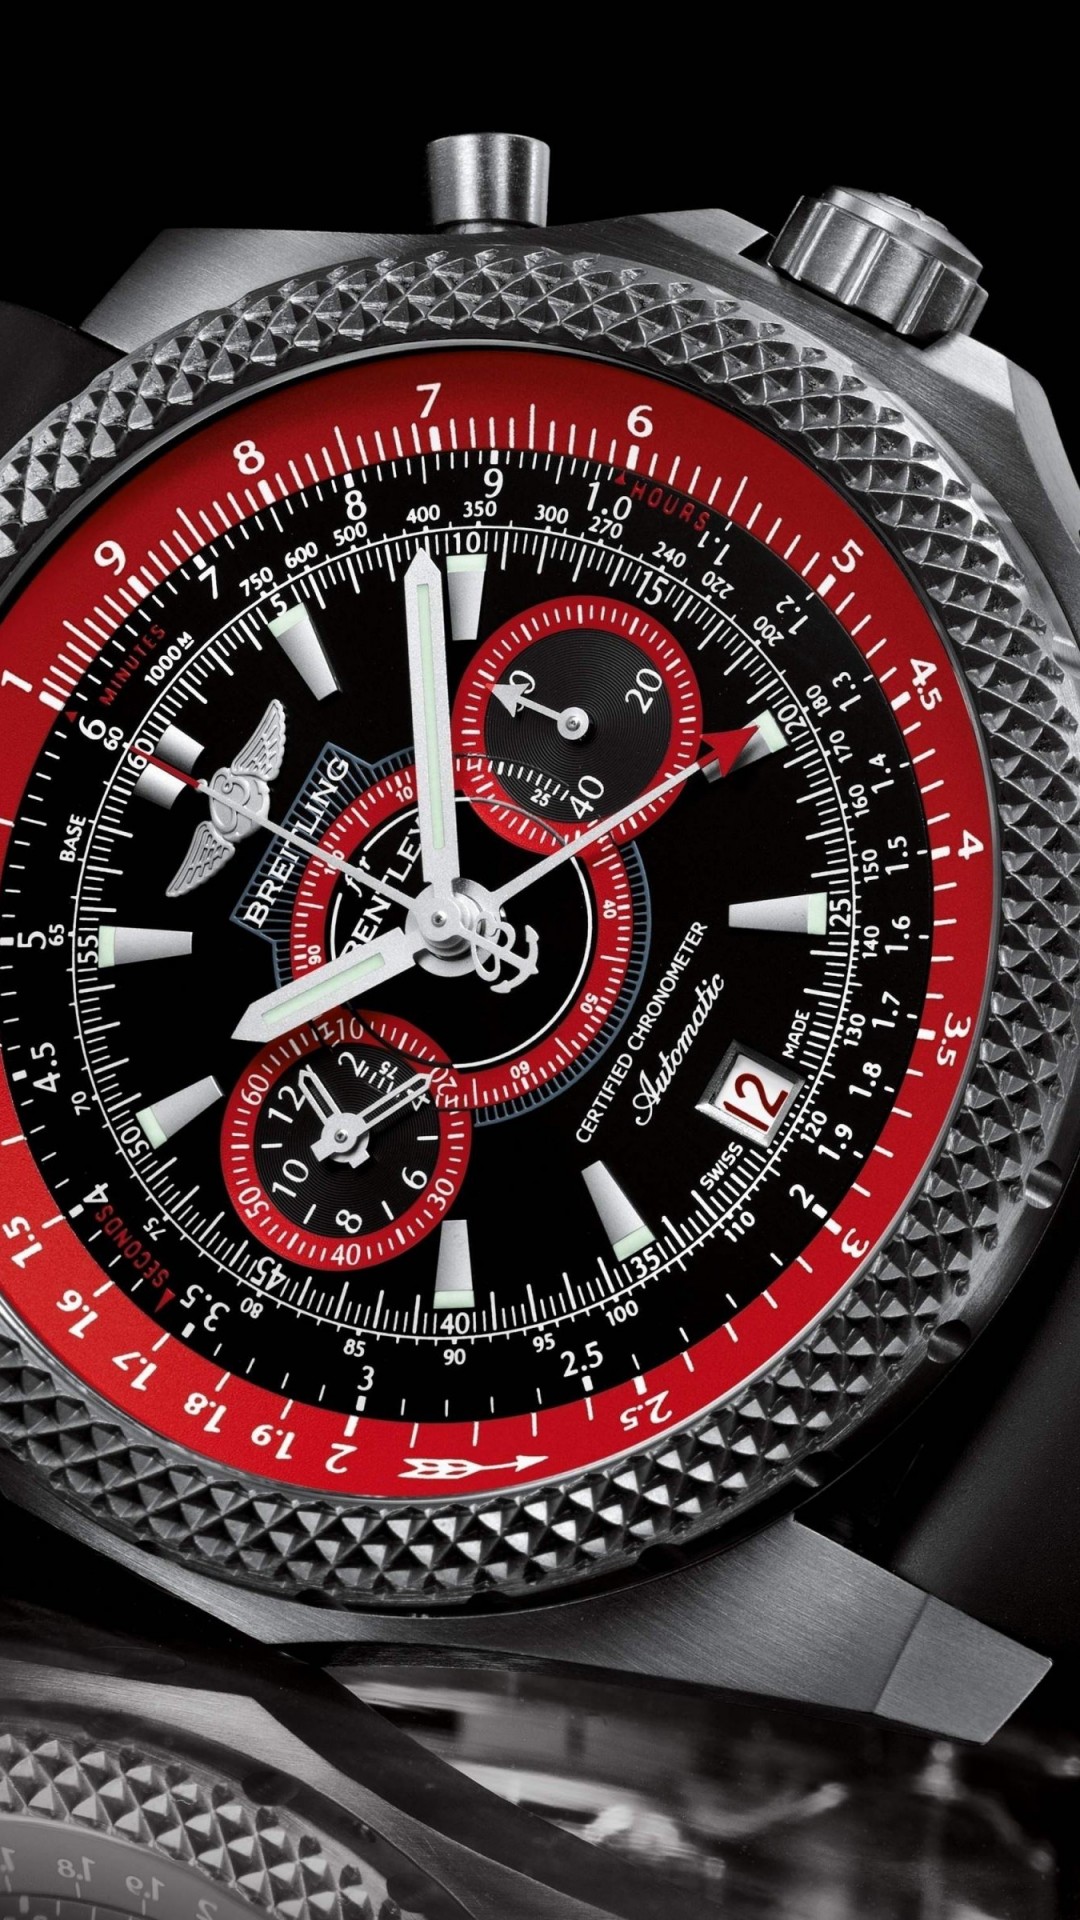 Breitling Watch Wallpaper for SAMSUNG Galaxy S4